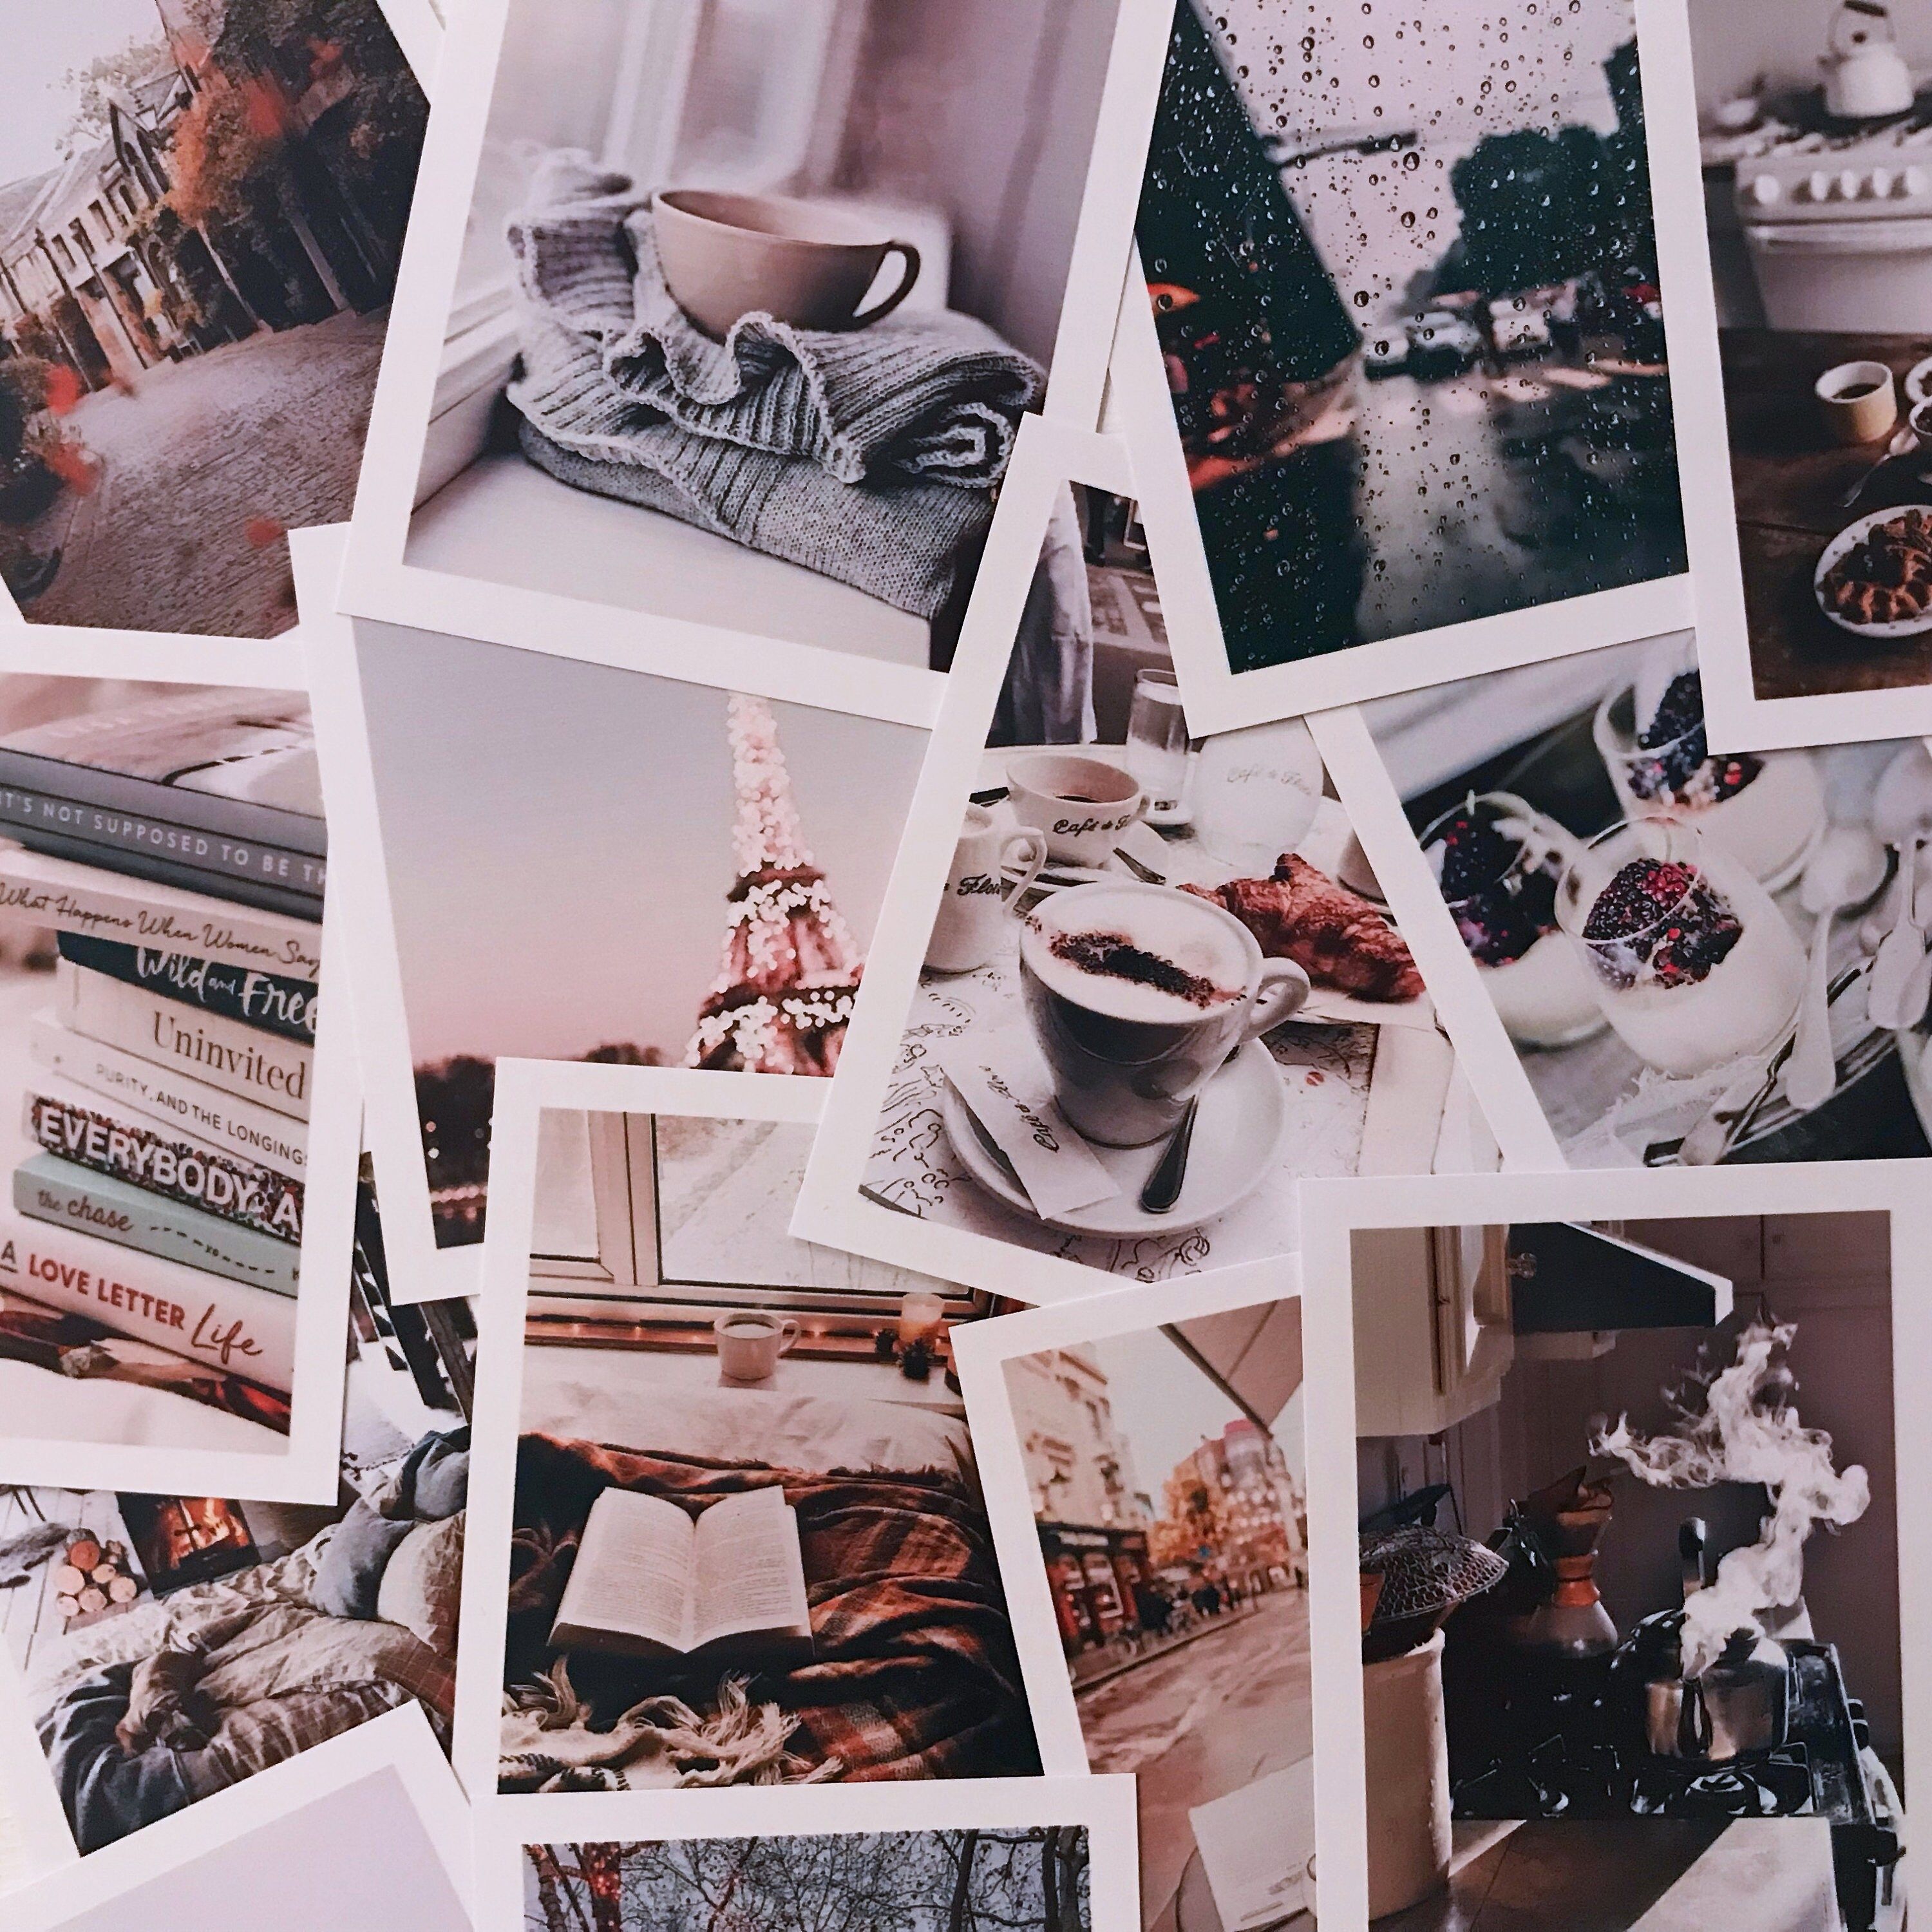 A collage of polaroid pictures of coffee, books, and sweaters. - Polaroid